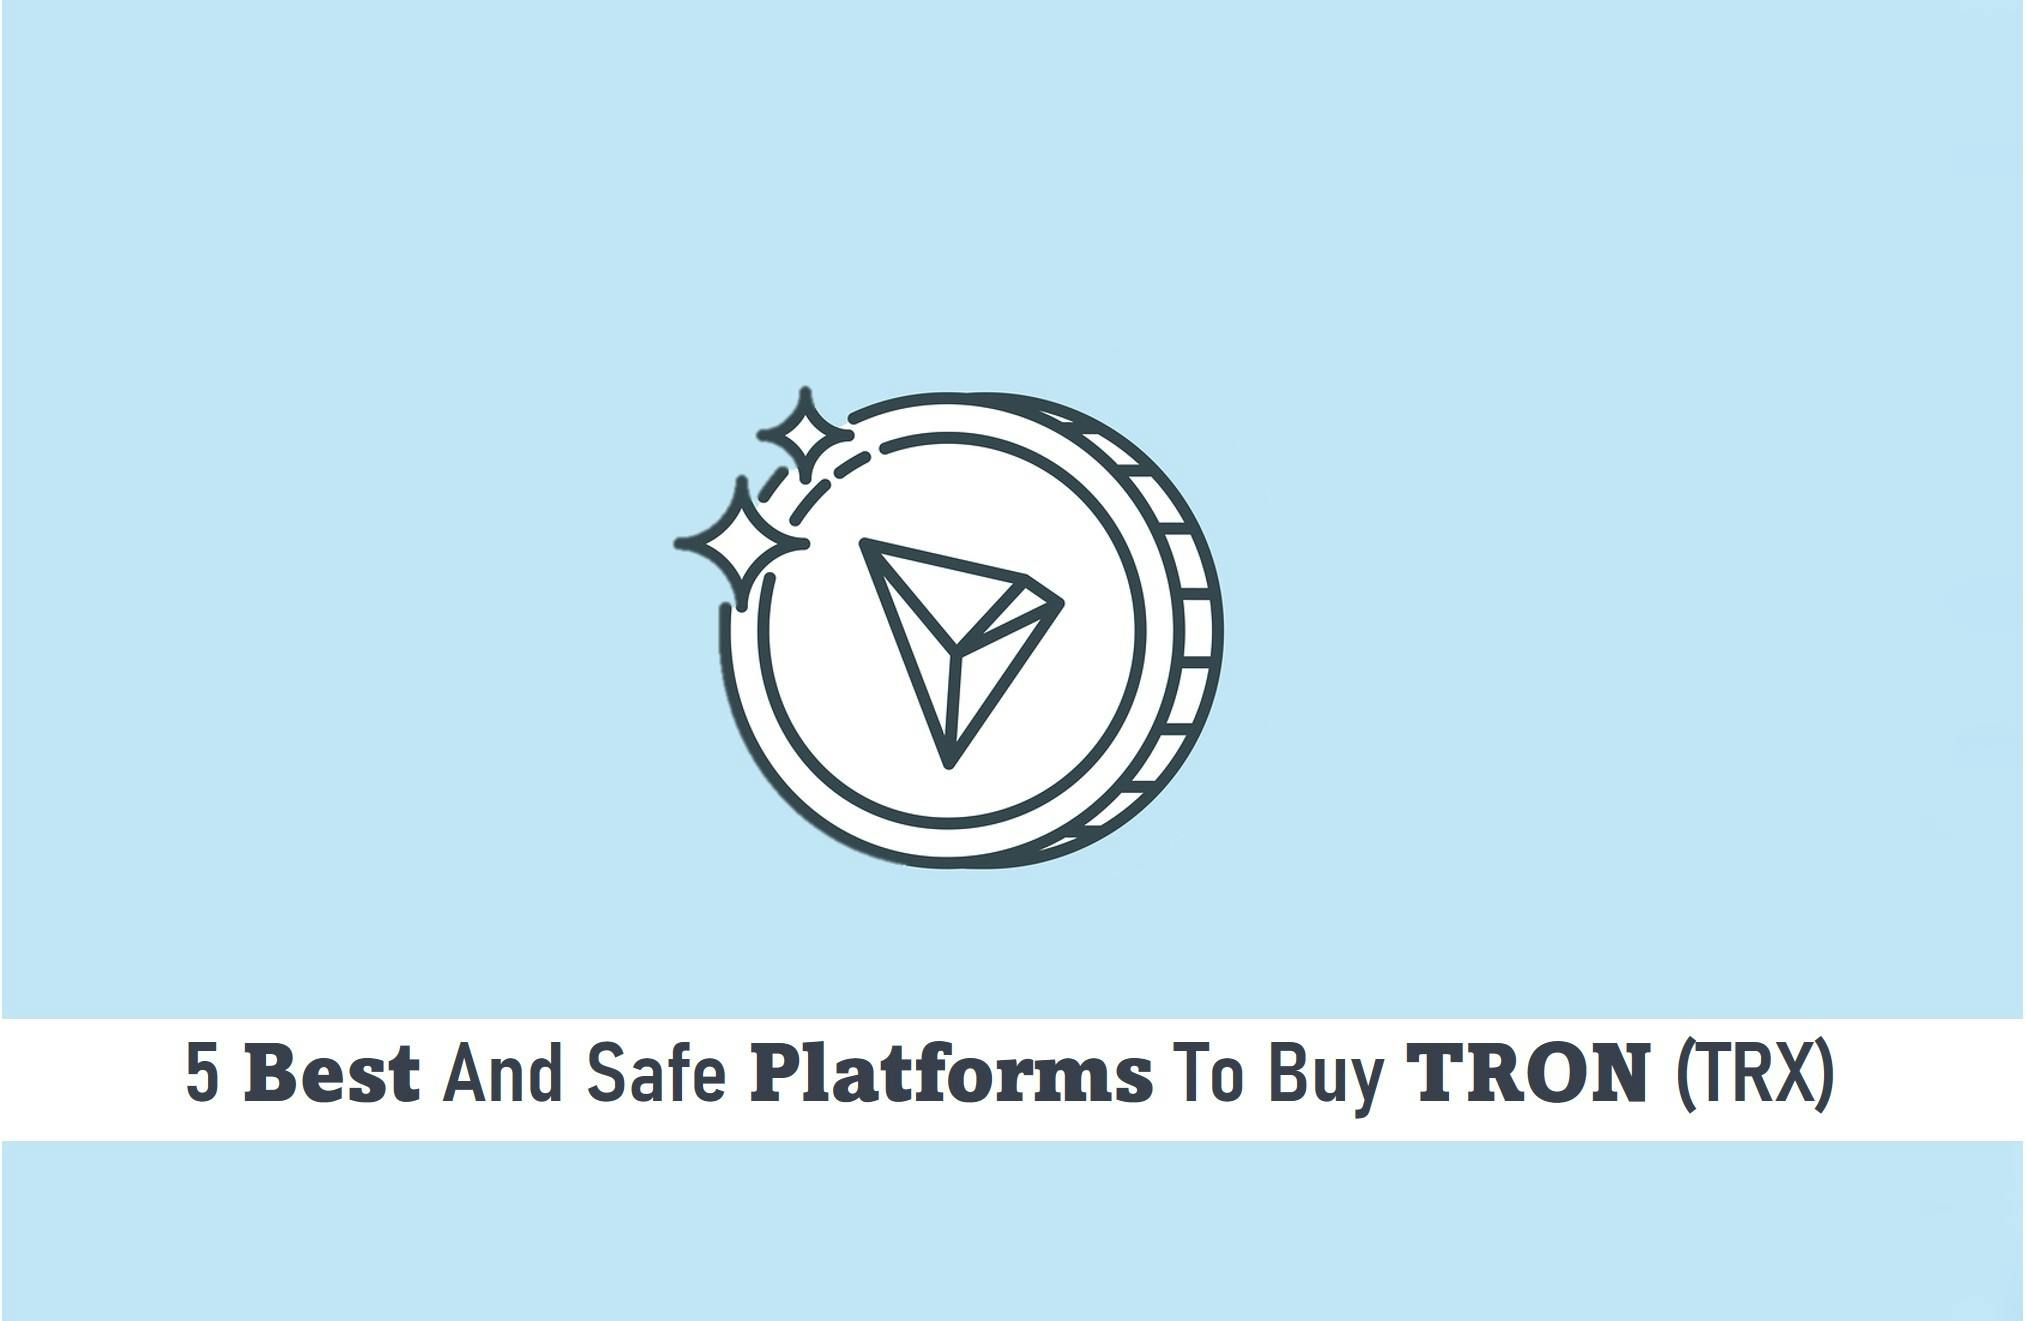 5 Best and Safe Platforms to Buy TRON (TRX)